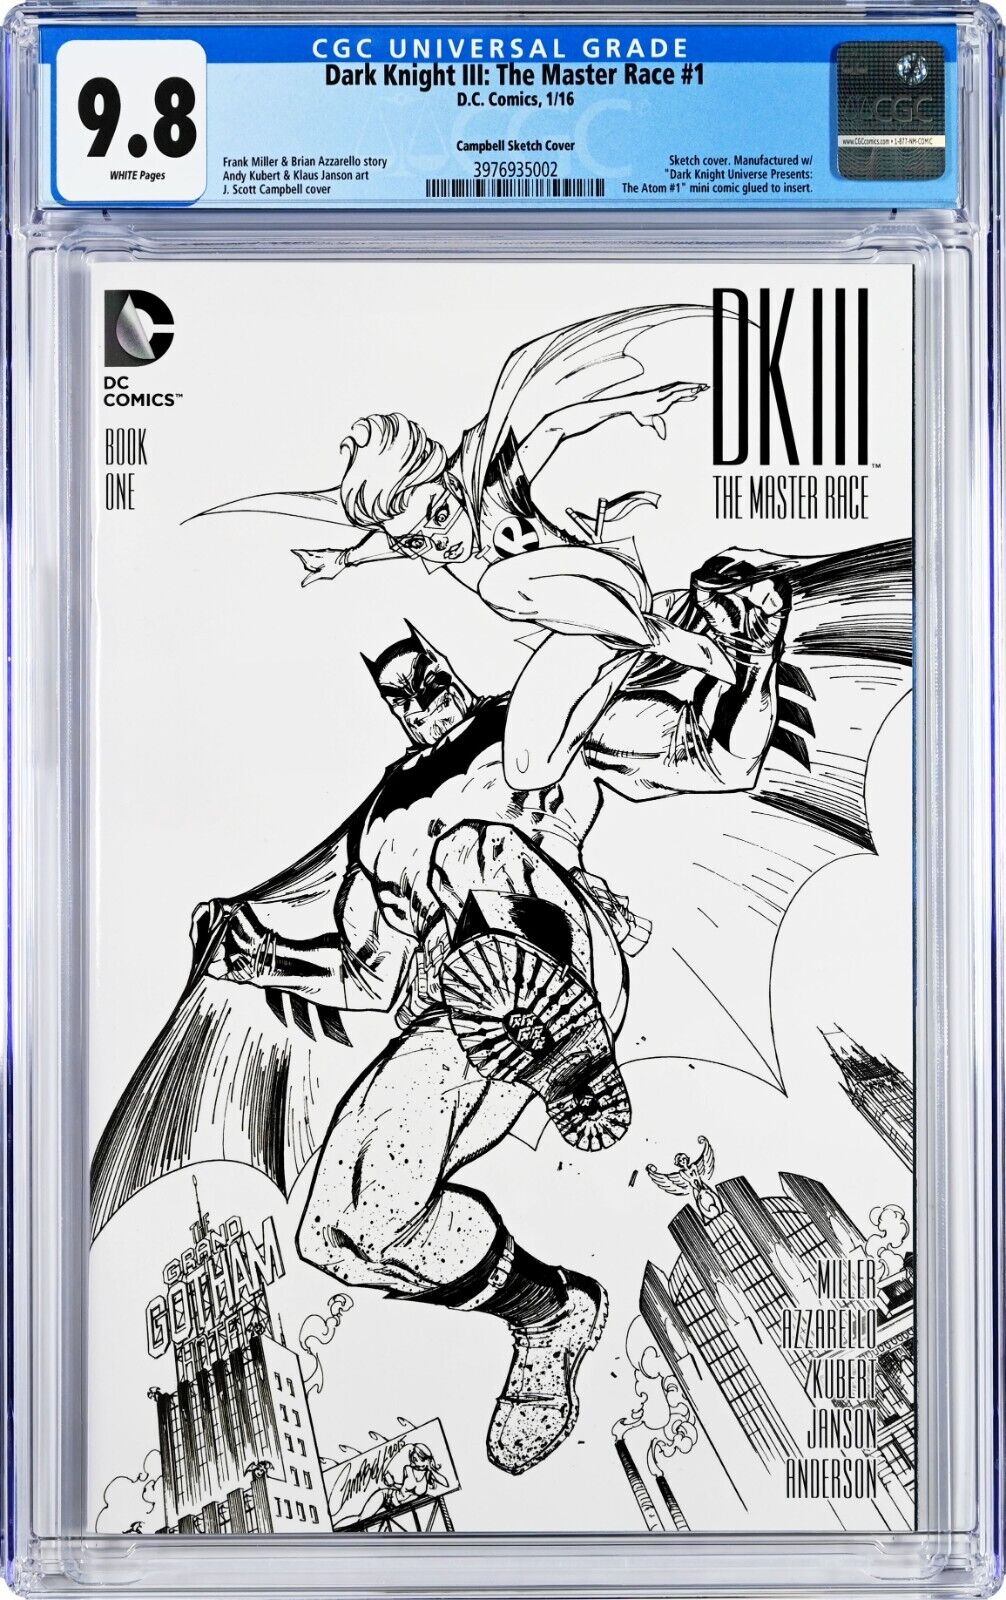 Dark Knight III: The Master Race #1 CGC 9.8 (Jan 2016, DC) Campbell Sketch Cover